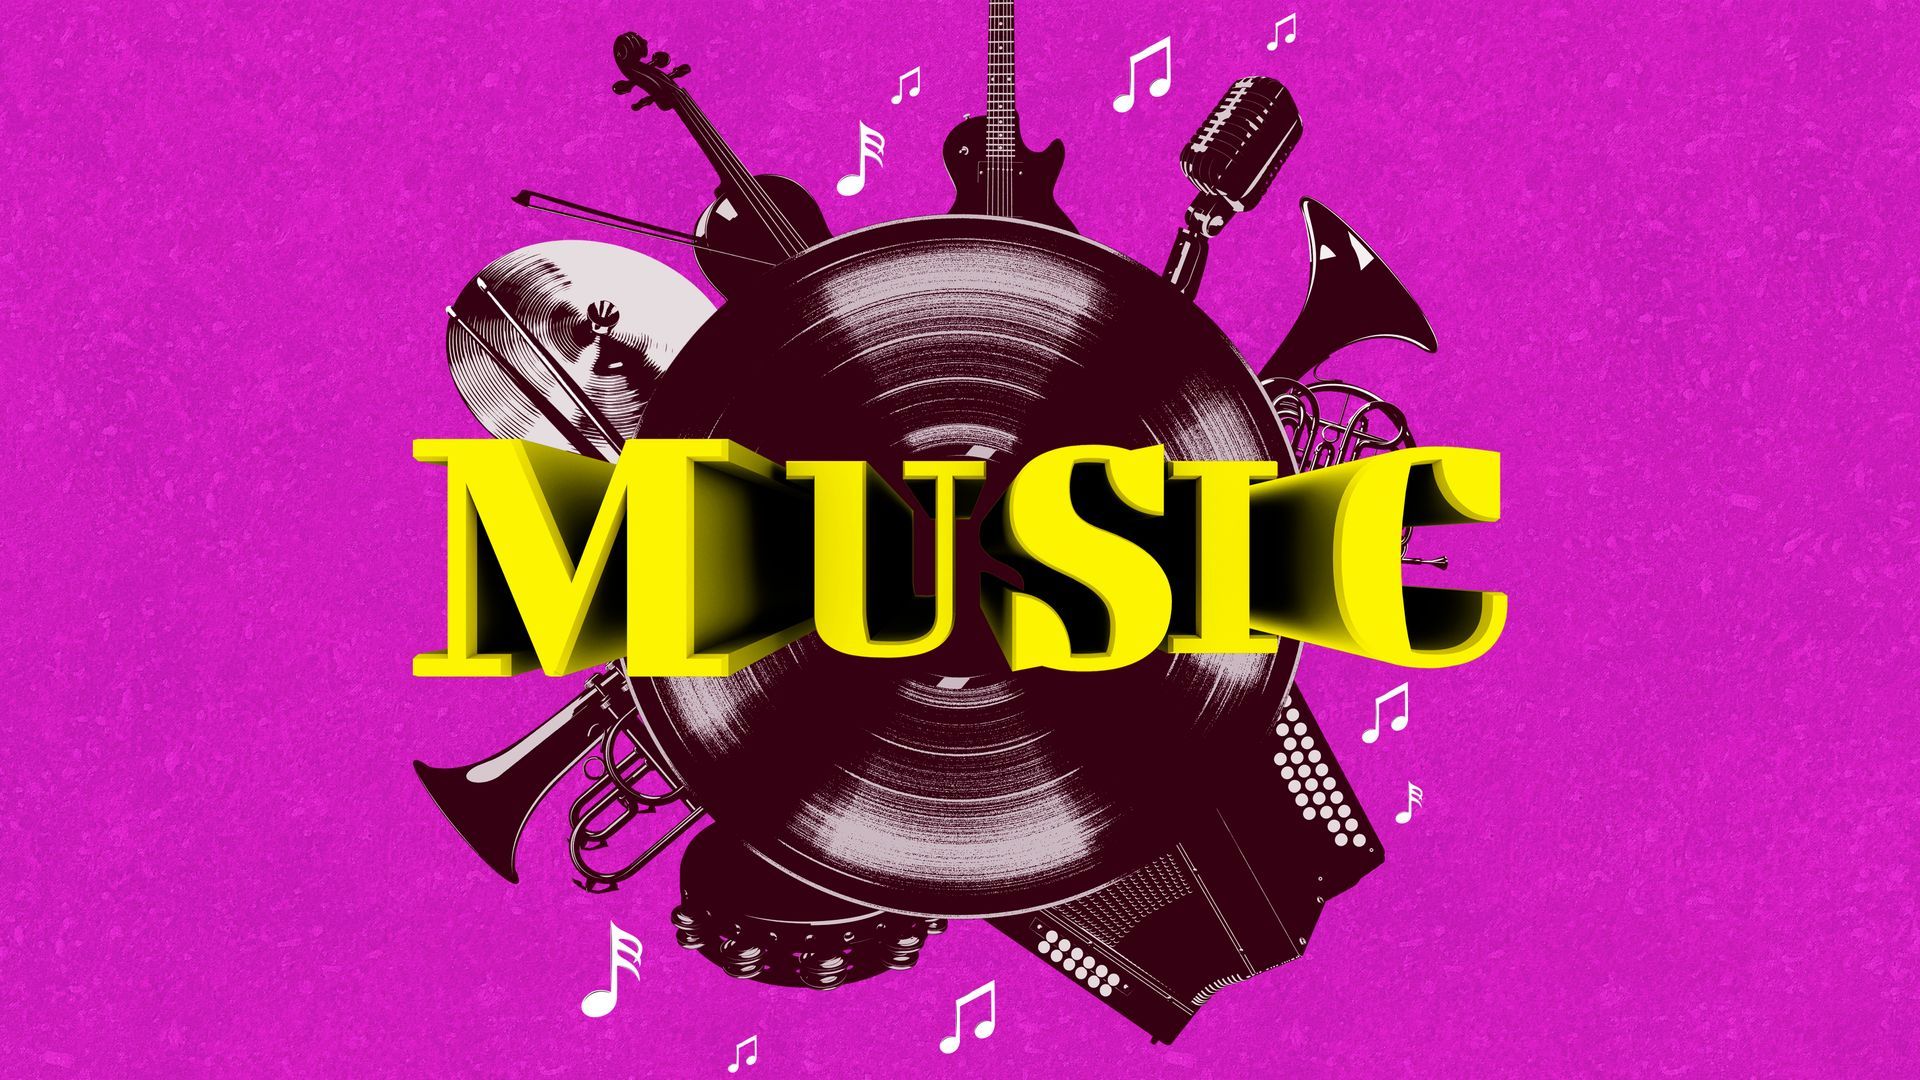 the word music is on a purple background